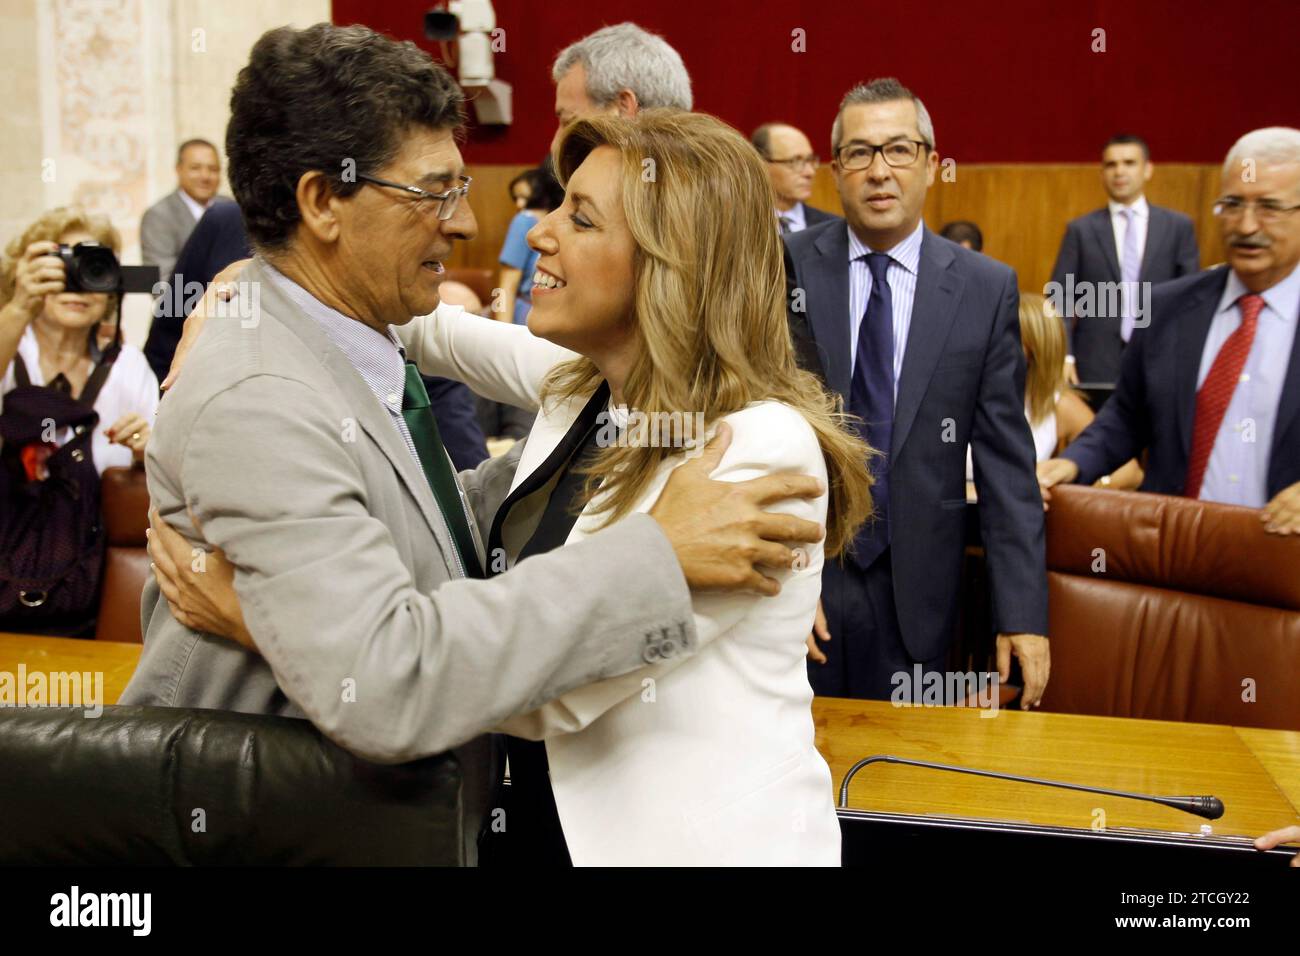 Seville. 4-September-2013. Investiture debate speech by Susana Diaz, the first female president of the Andalusian regional government. In the Image, Diego Valderas and Susana Díaz Pacheco hug each other. Photo: Raul Doblado. Archsev Raul dubbed. Credit: Album / Archivo ABC / Raúl Doblado Stock Photo